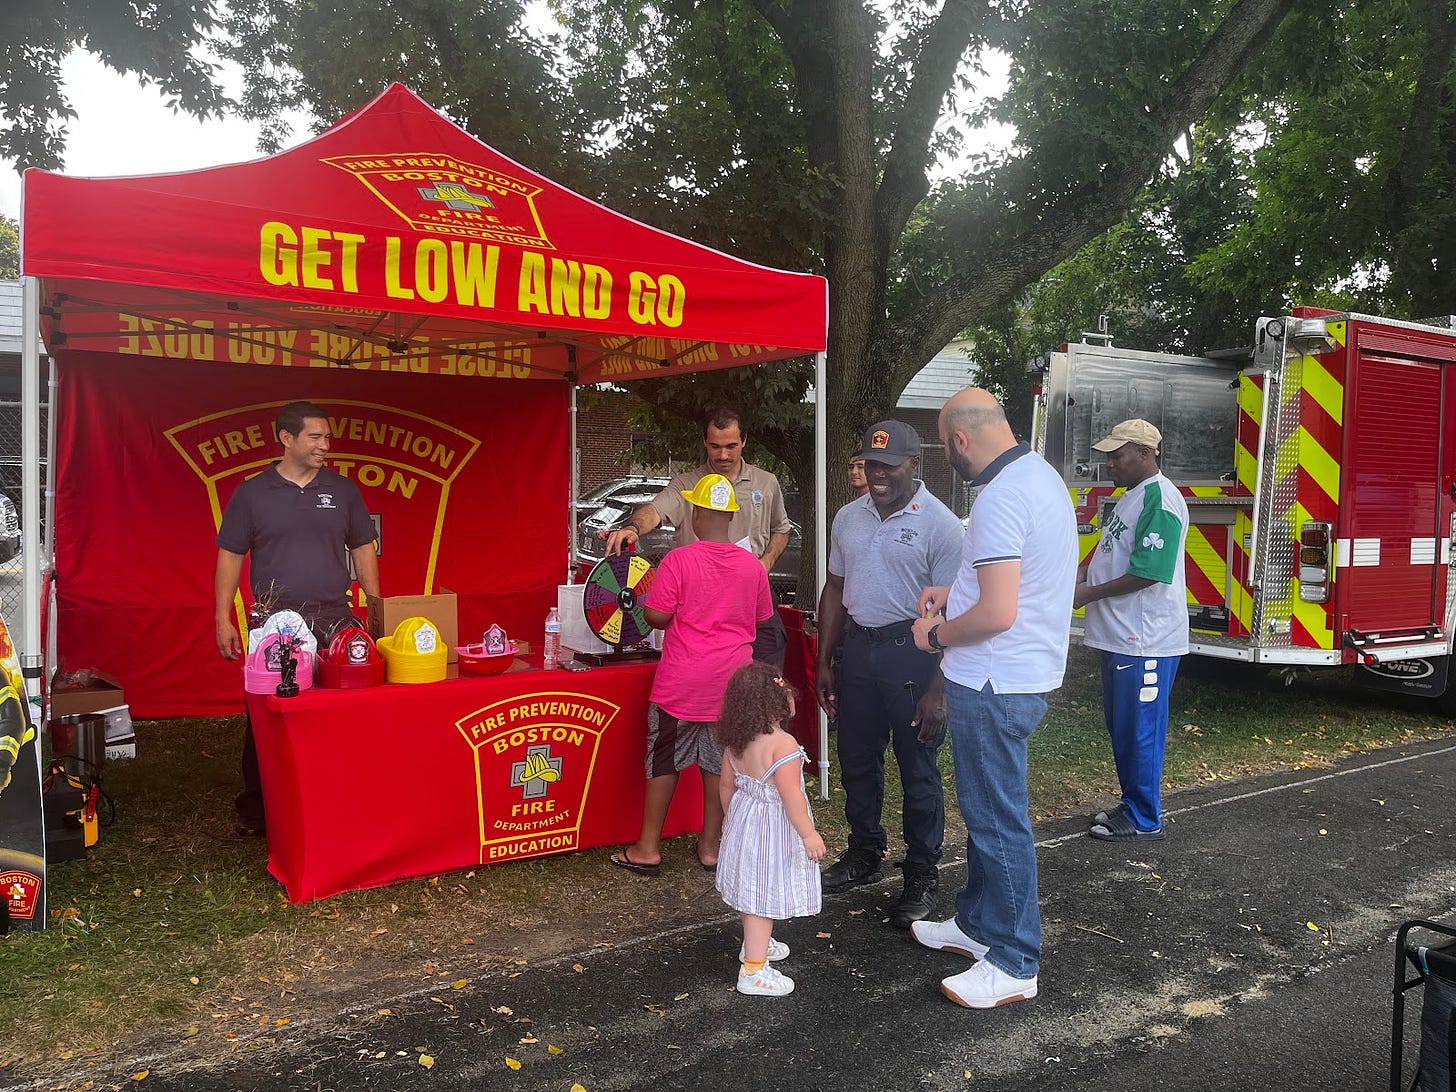 Firefighters speak to community members at the Ready Boston event with a tent that says "Get Low and Go" and the Boston Fire Department logo